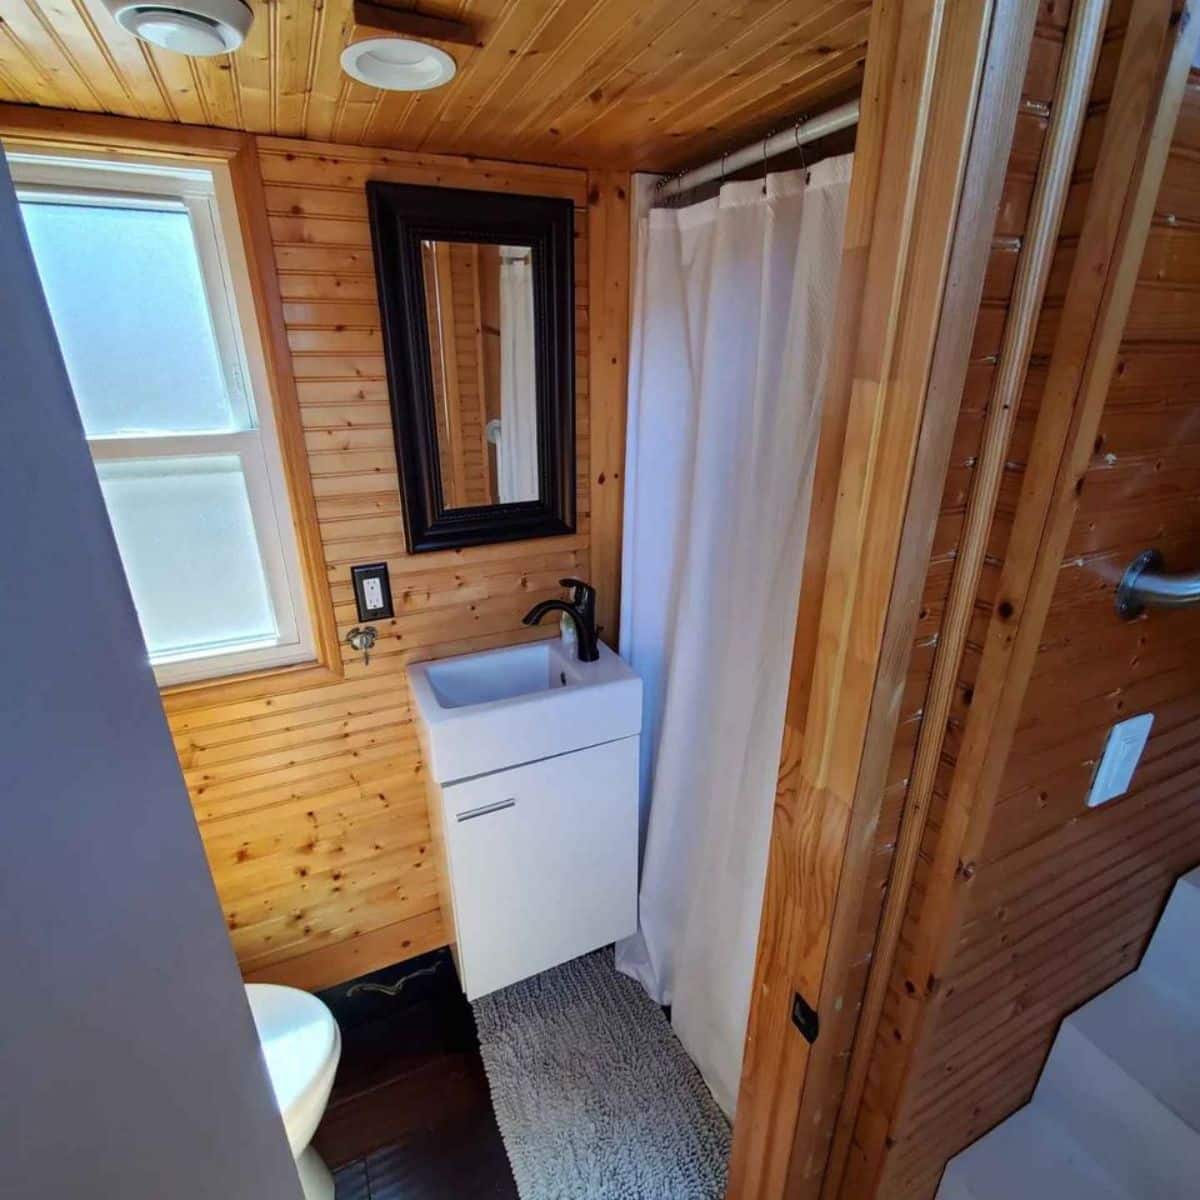 bathroom of tiny home with downstairs bedroom has all the standard fittings